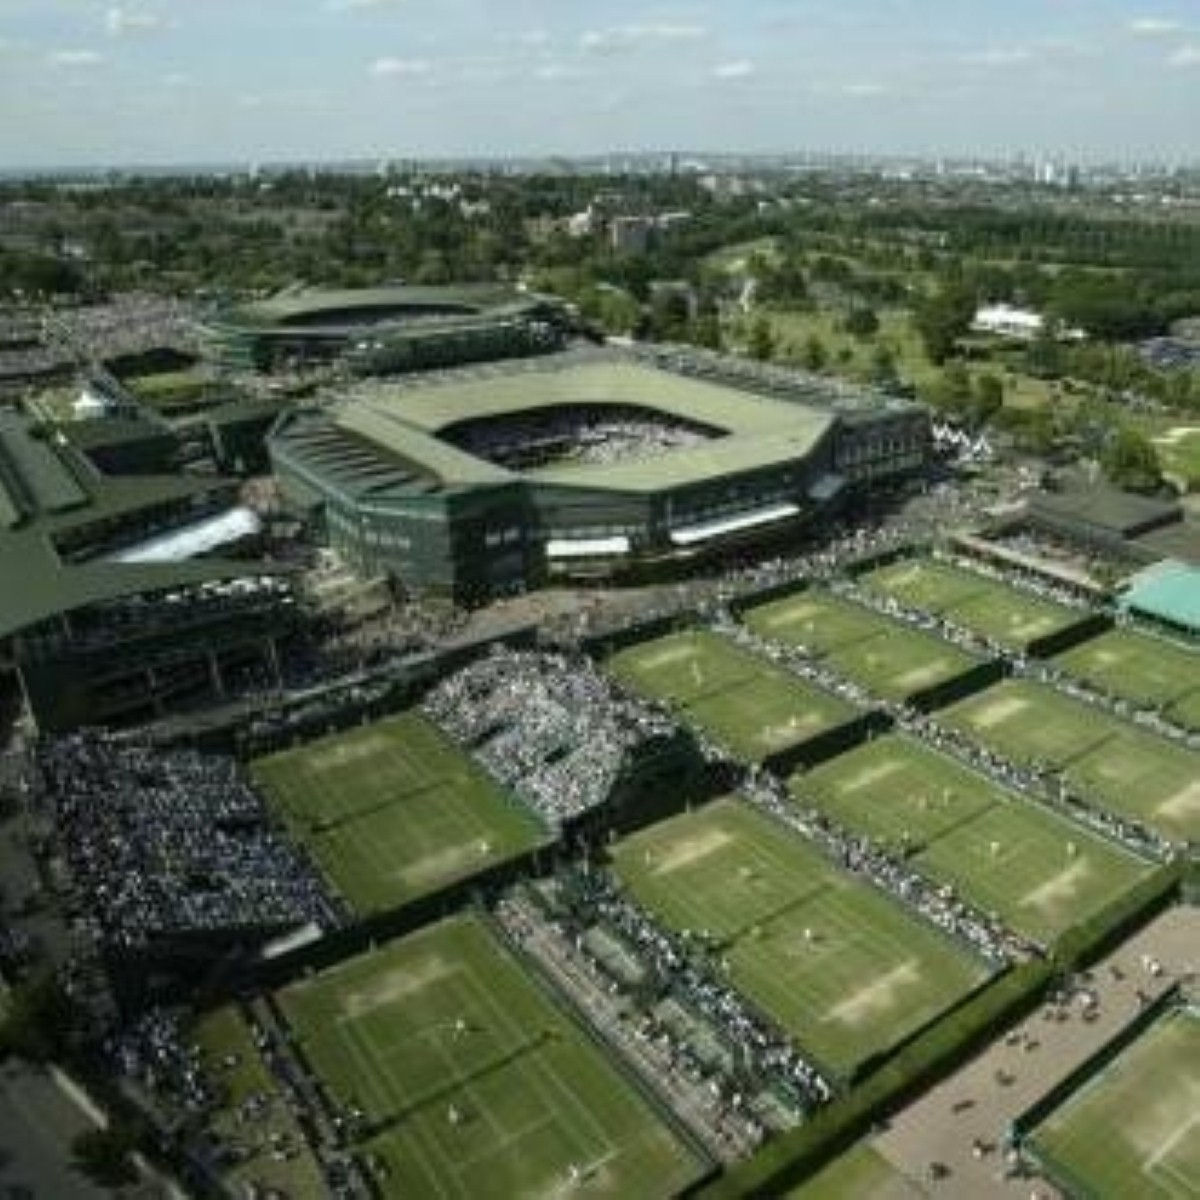 Discover the history of the Lawn Tennis Championship at Wimbledon this summer